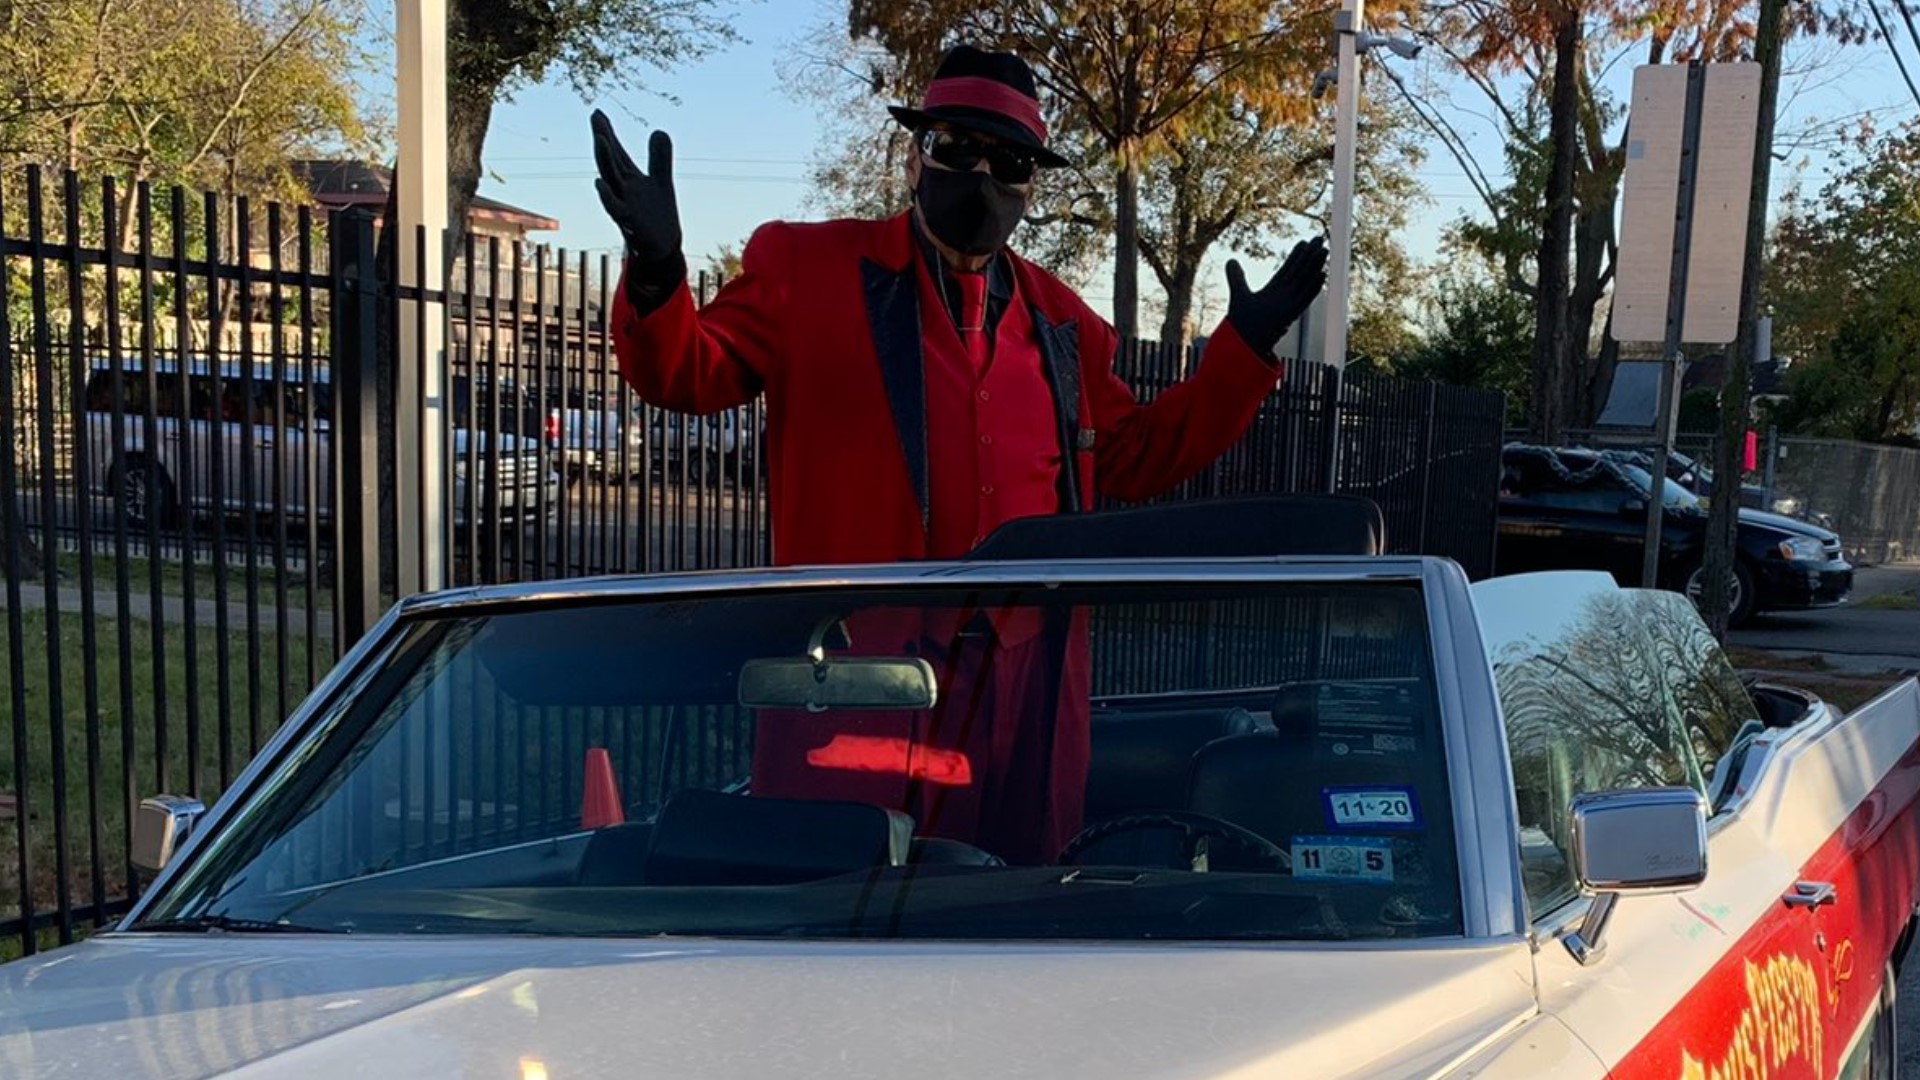 Pancho Claus and his low-rider friends have distributed toys in Houston's East End for 40 years and he wasn't going to let a tough 2020 stop him this year.